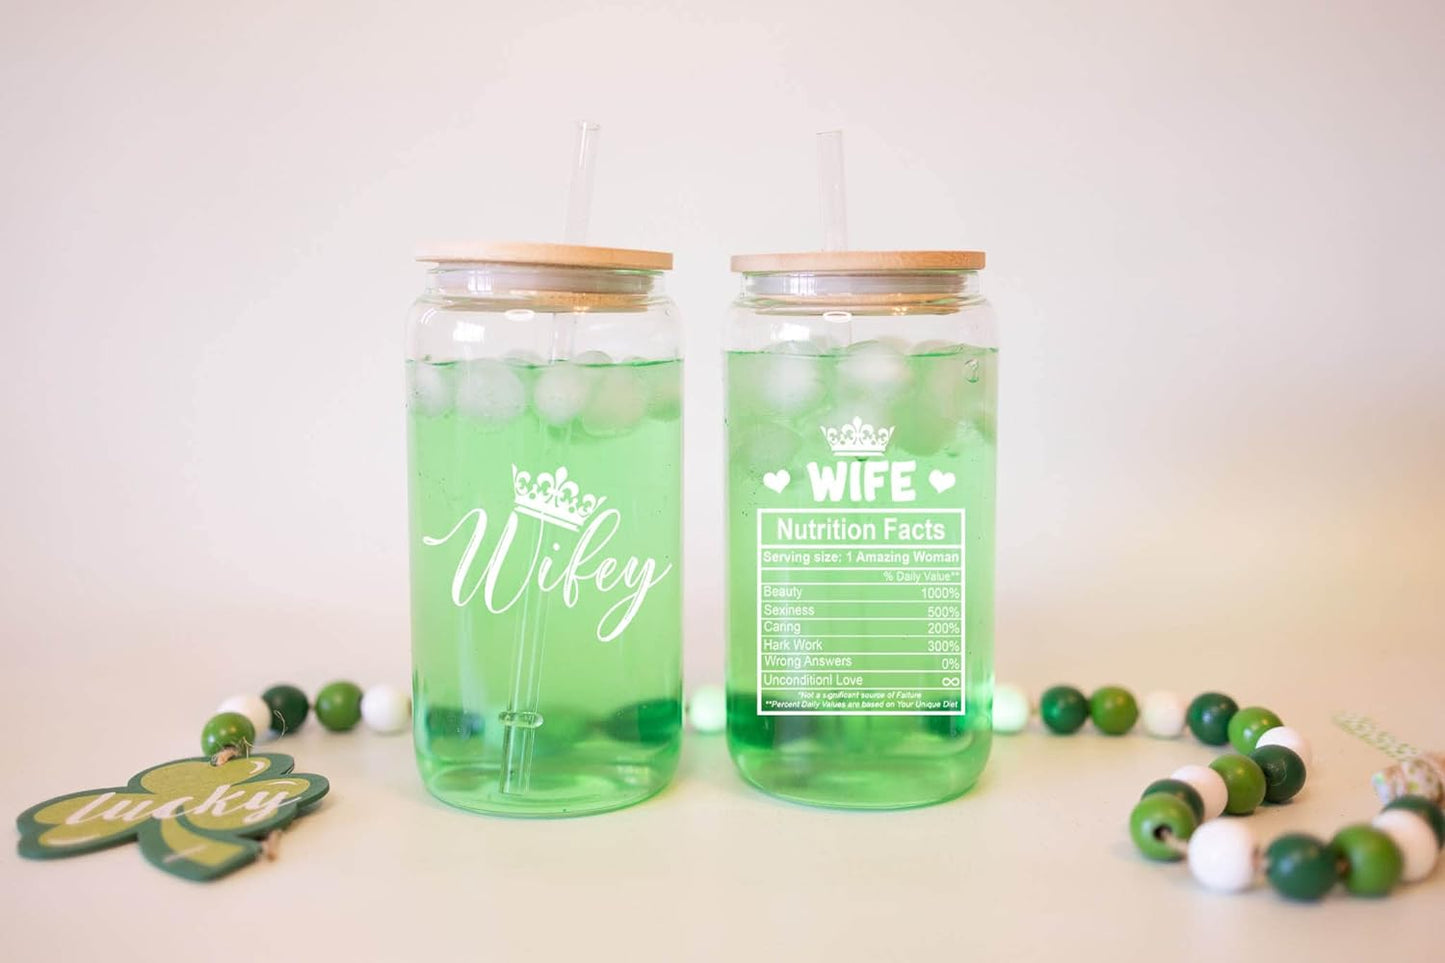 Gifts for Wife from Husband - Wife Gifts - Valentine's Day, Wedding Anniversary, Birthday Gifts for Wife, Mothers Day Gifts for Wife - Funny I Love You Gifts for Her, Romantic Gifts for Her - 16 Oz Wife Glass Drinking